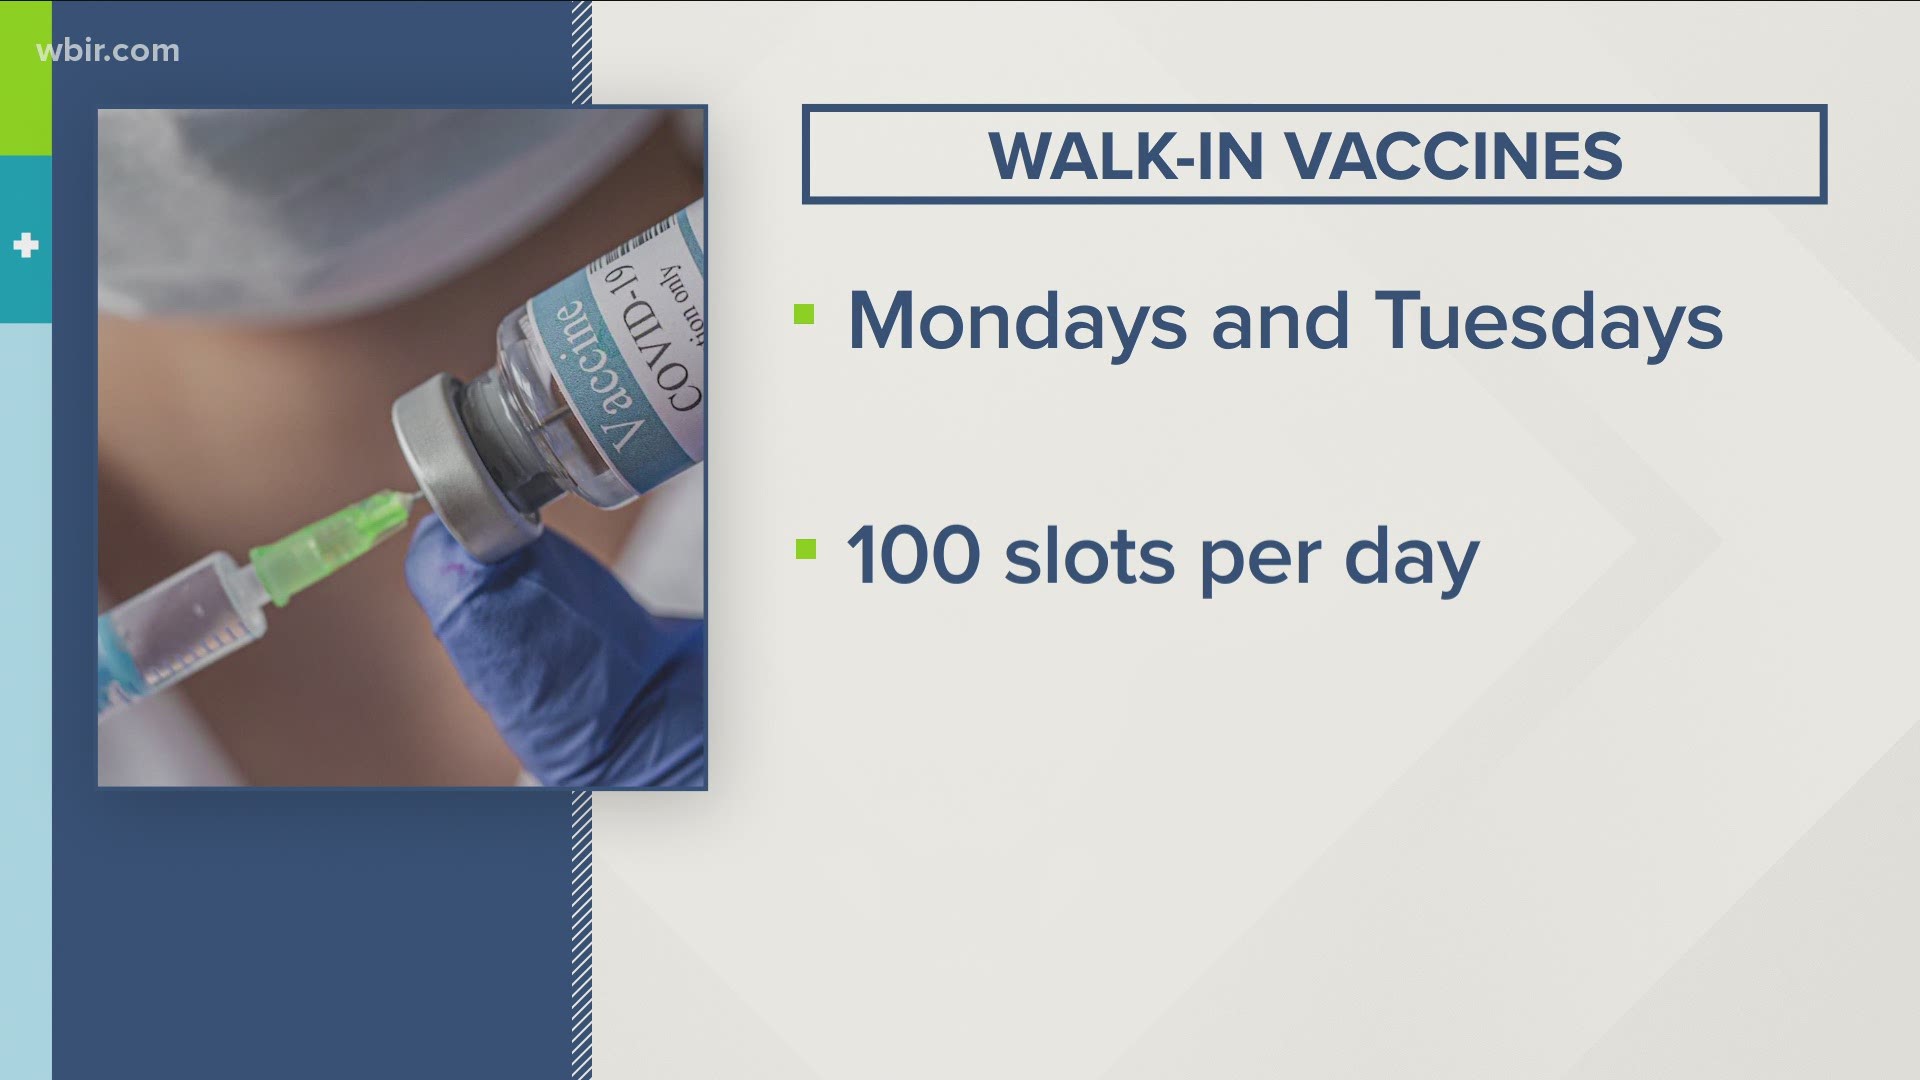 The Knox County Health Department says starting next week you won't have to make an appointment to get a Covid-19 vaccine.